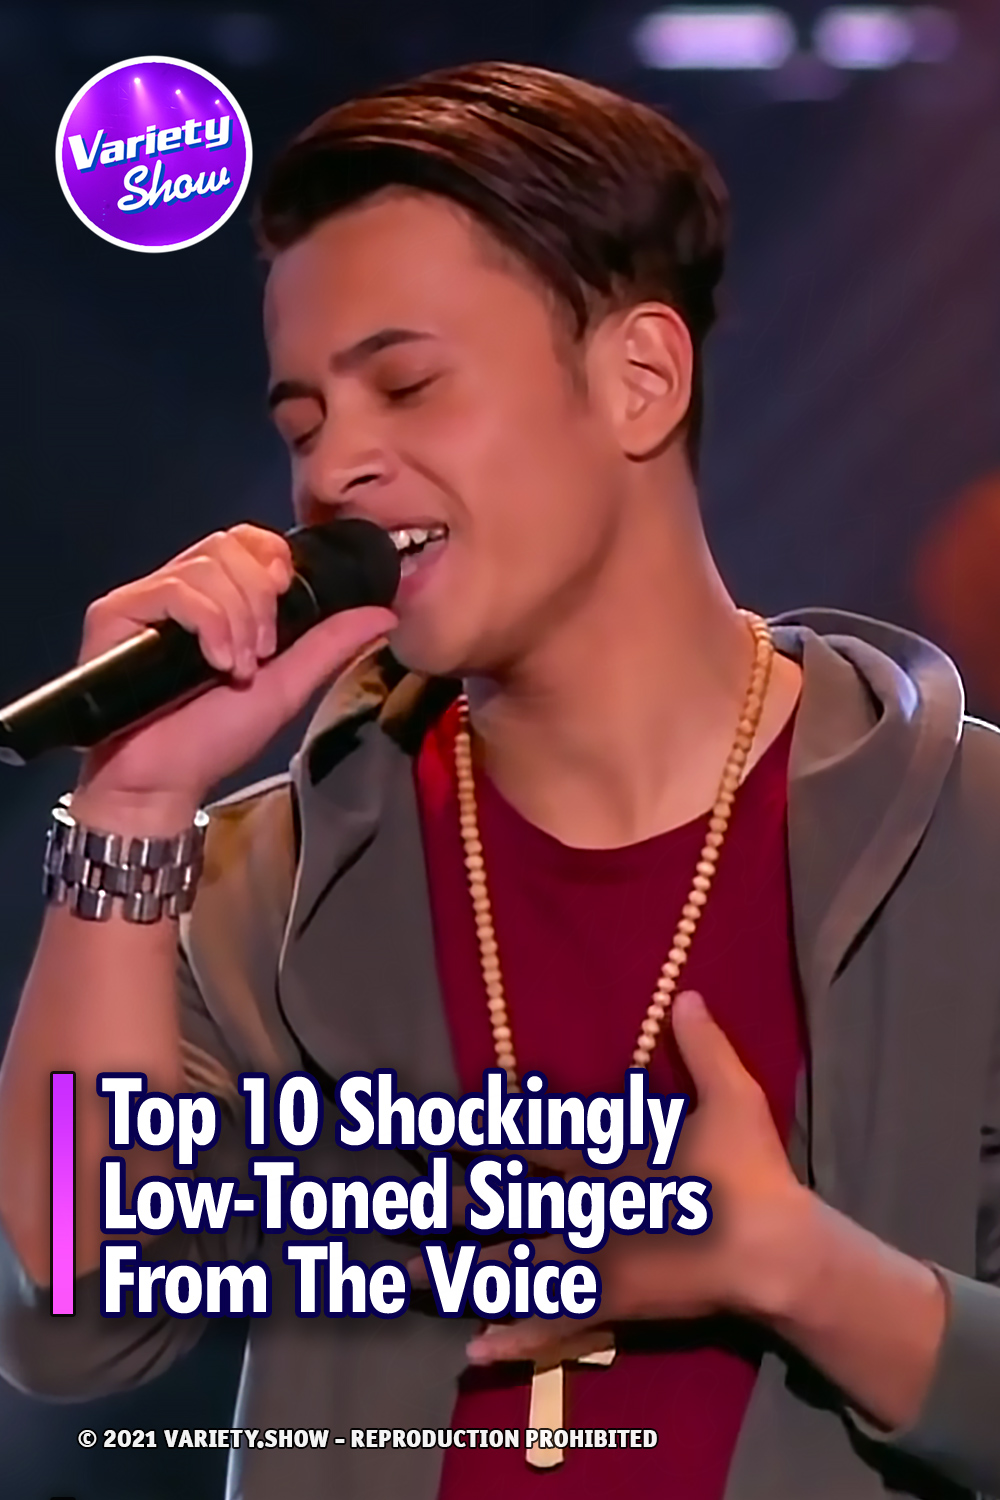 Top 10 Shockingly Low-Toned Singers From The Voice